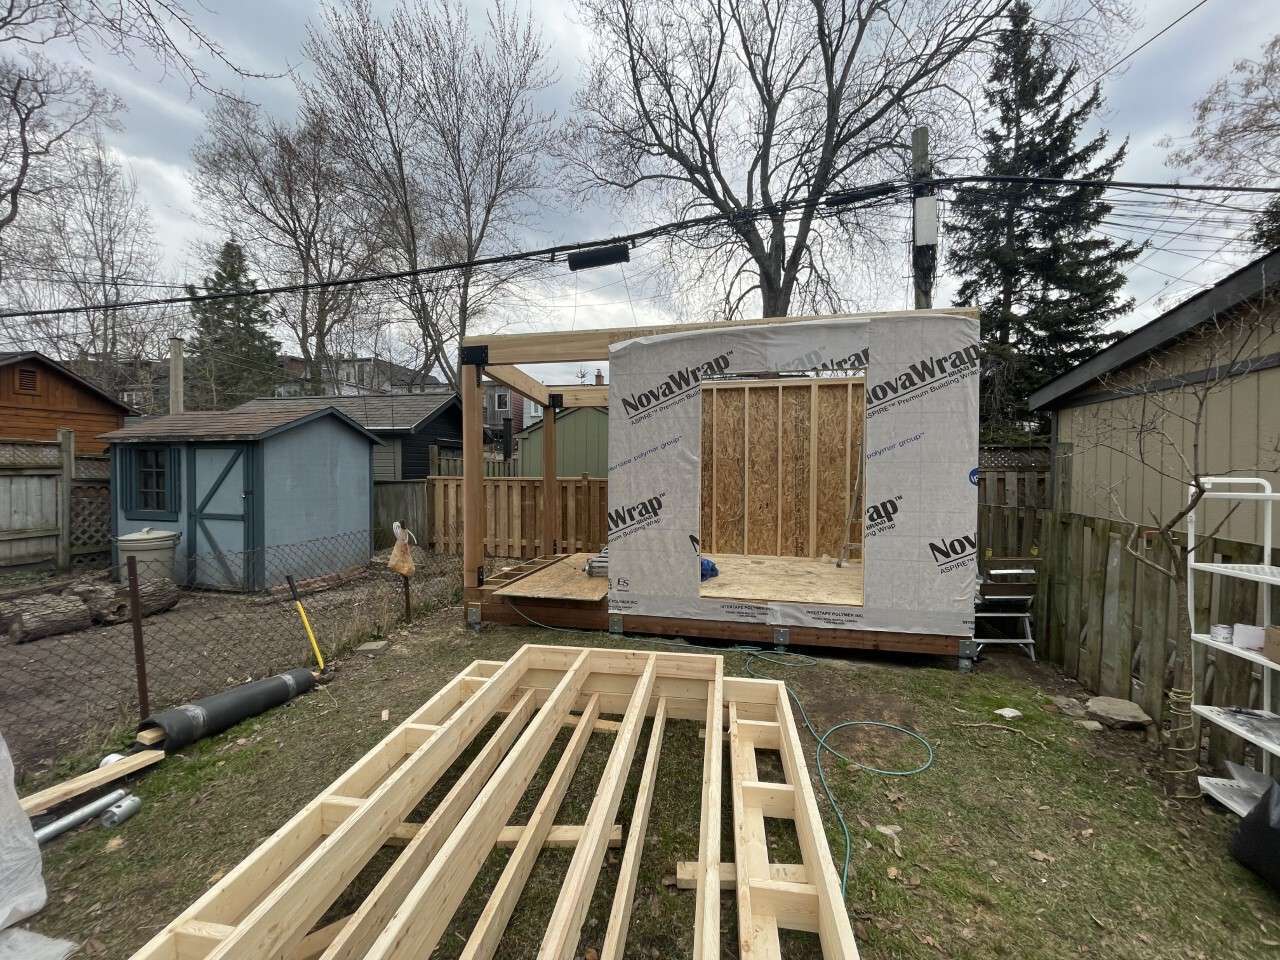 Frame Install of 7' x 15' Urban Studio located in Toronto, Ontario – Summerwood Products